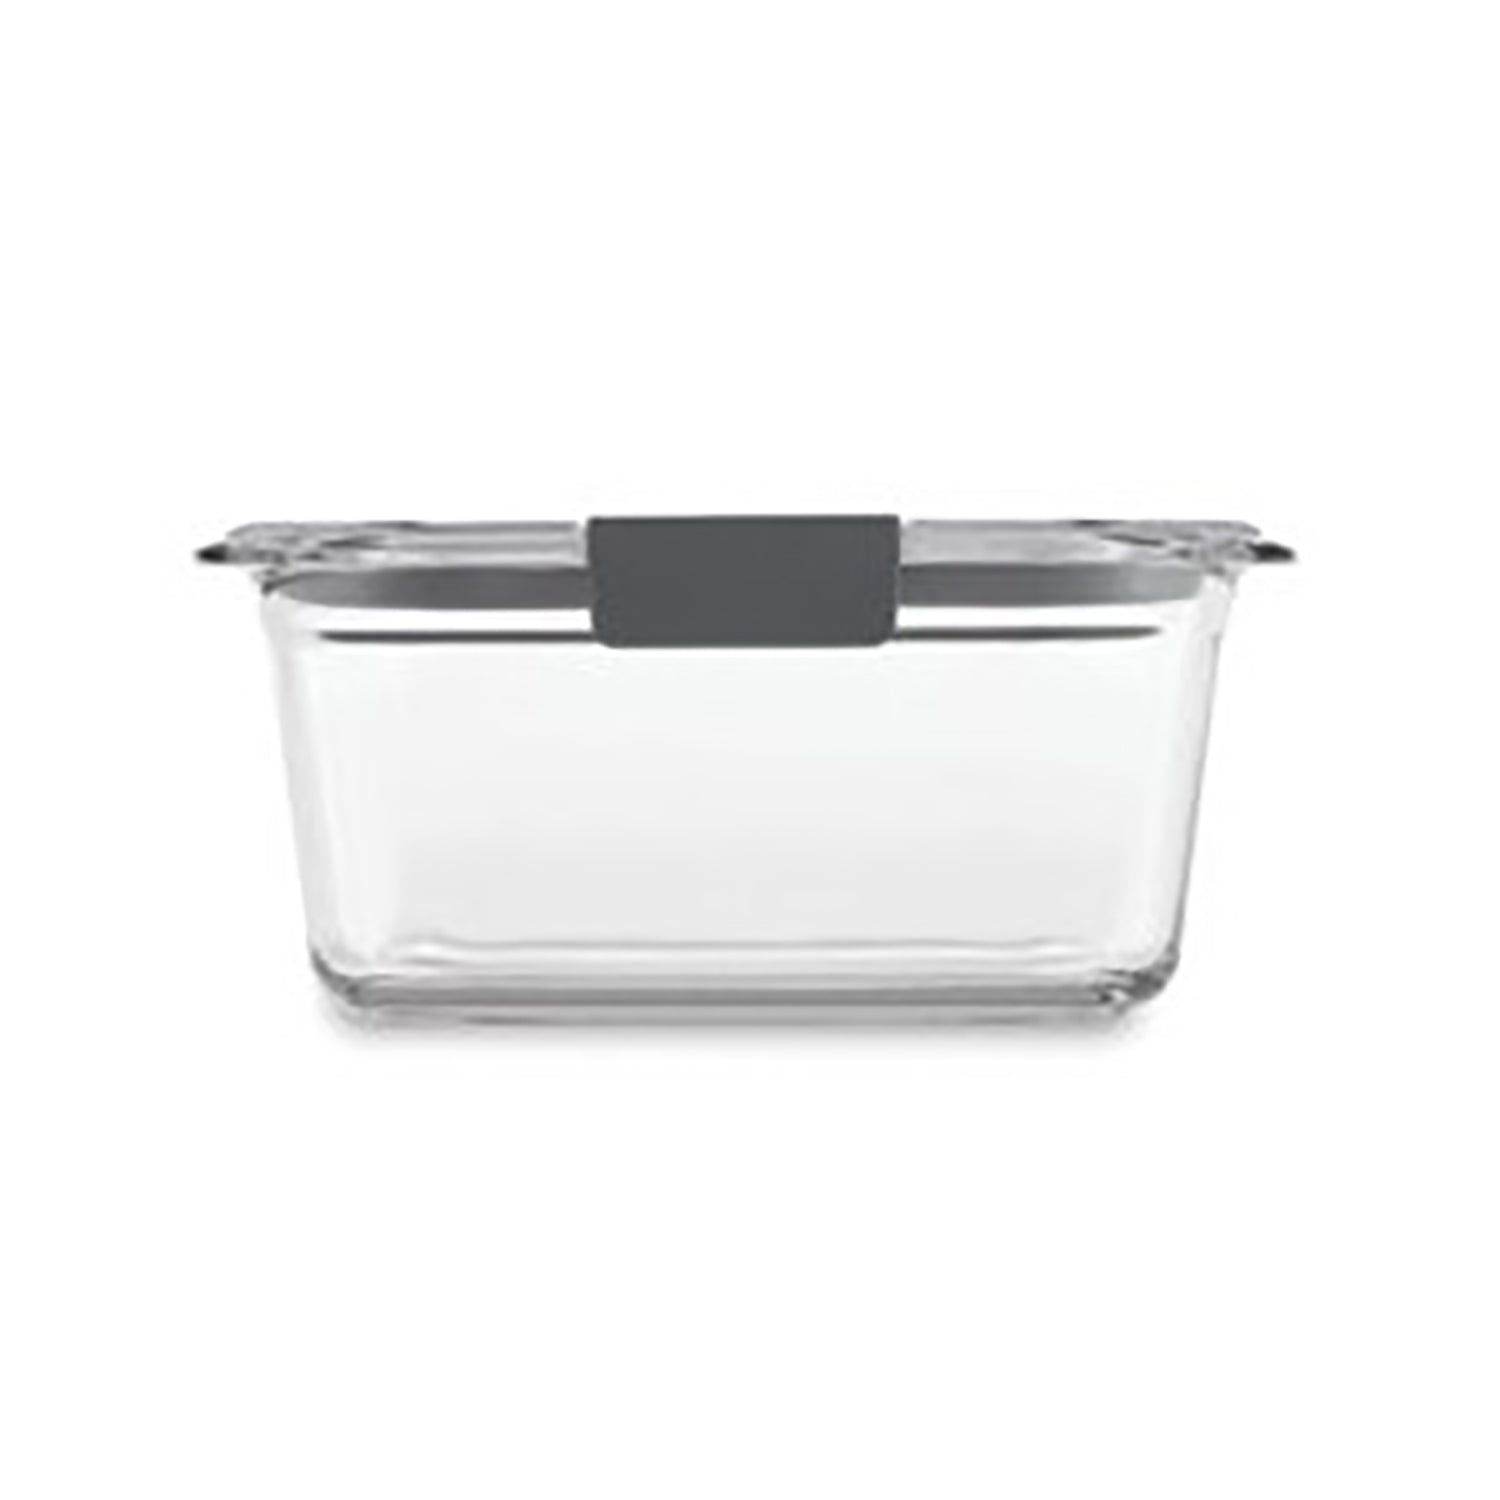  Rubbermaid Leak-Proof Brilliance Food Storage Set  9.6 Cup  Plastic Containers with Lids, 2-Pack, Clear & Brilliance Food Storage  Container, BPA free Plastic, Medium, 3.2 Cup, 5 Pack, Clear: Home & Kitchen